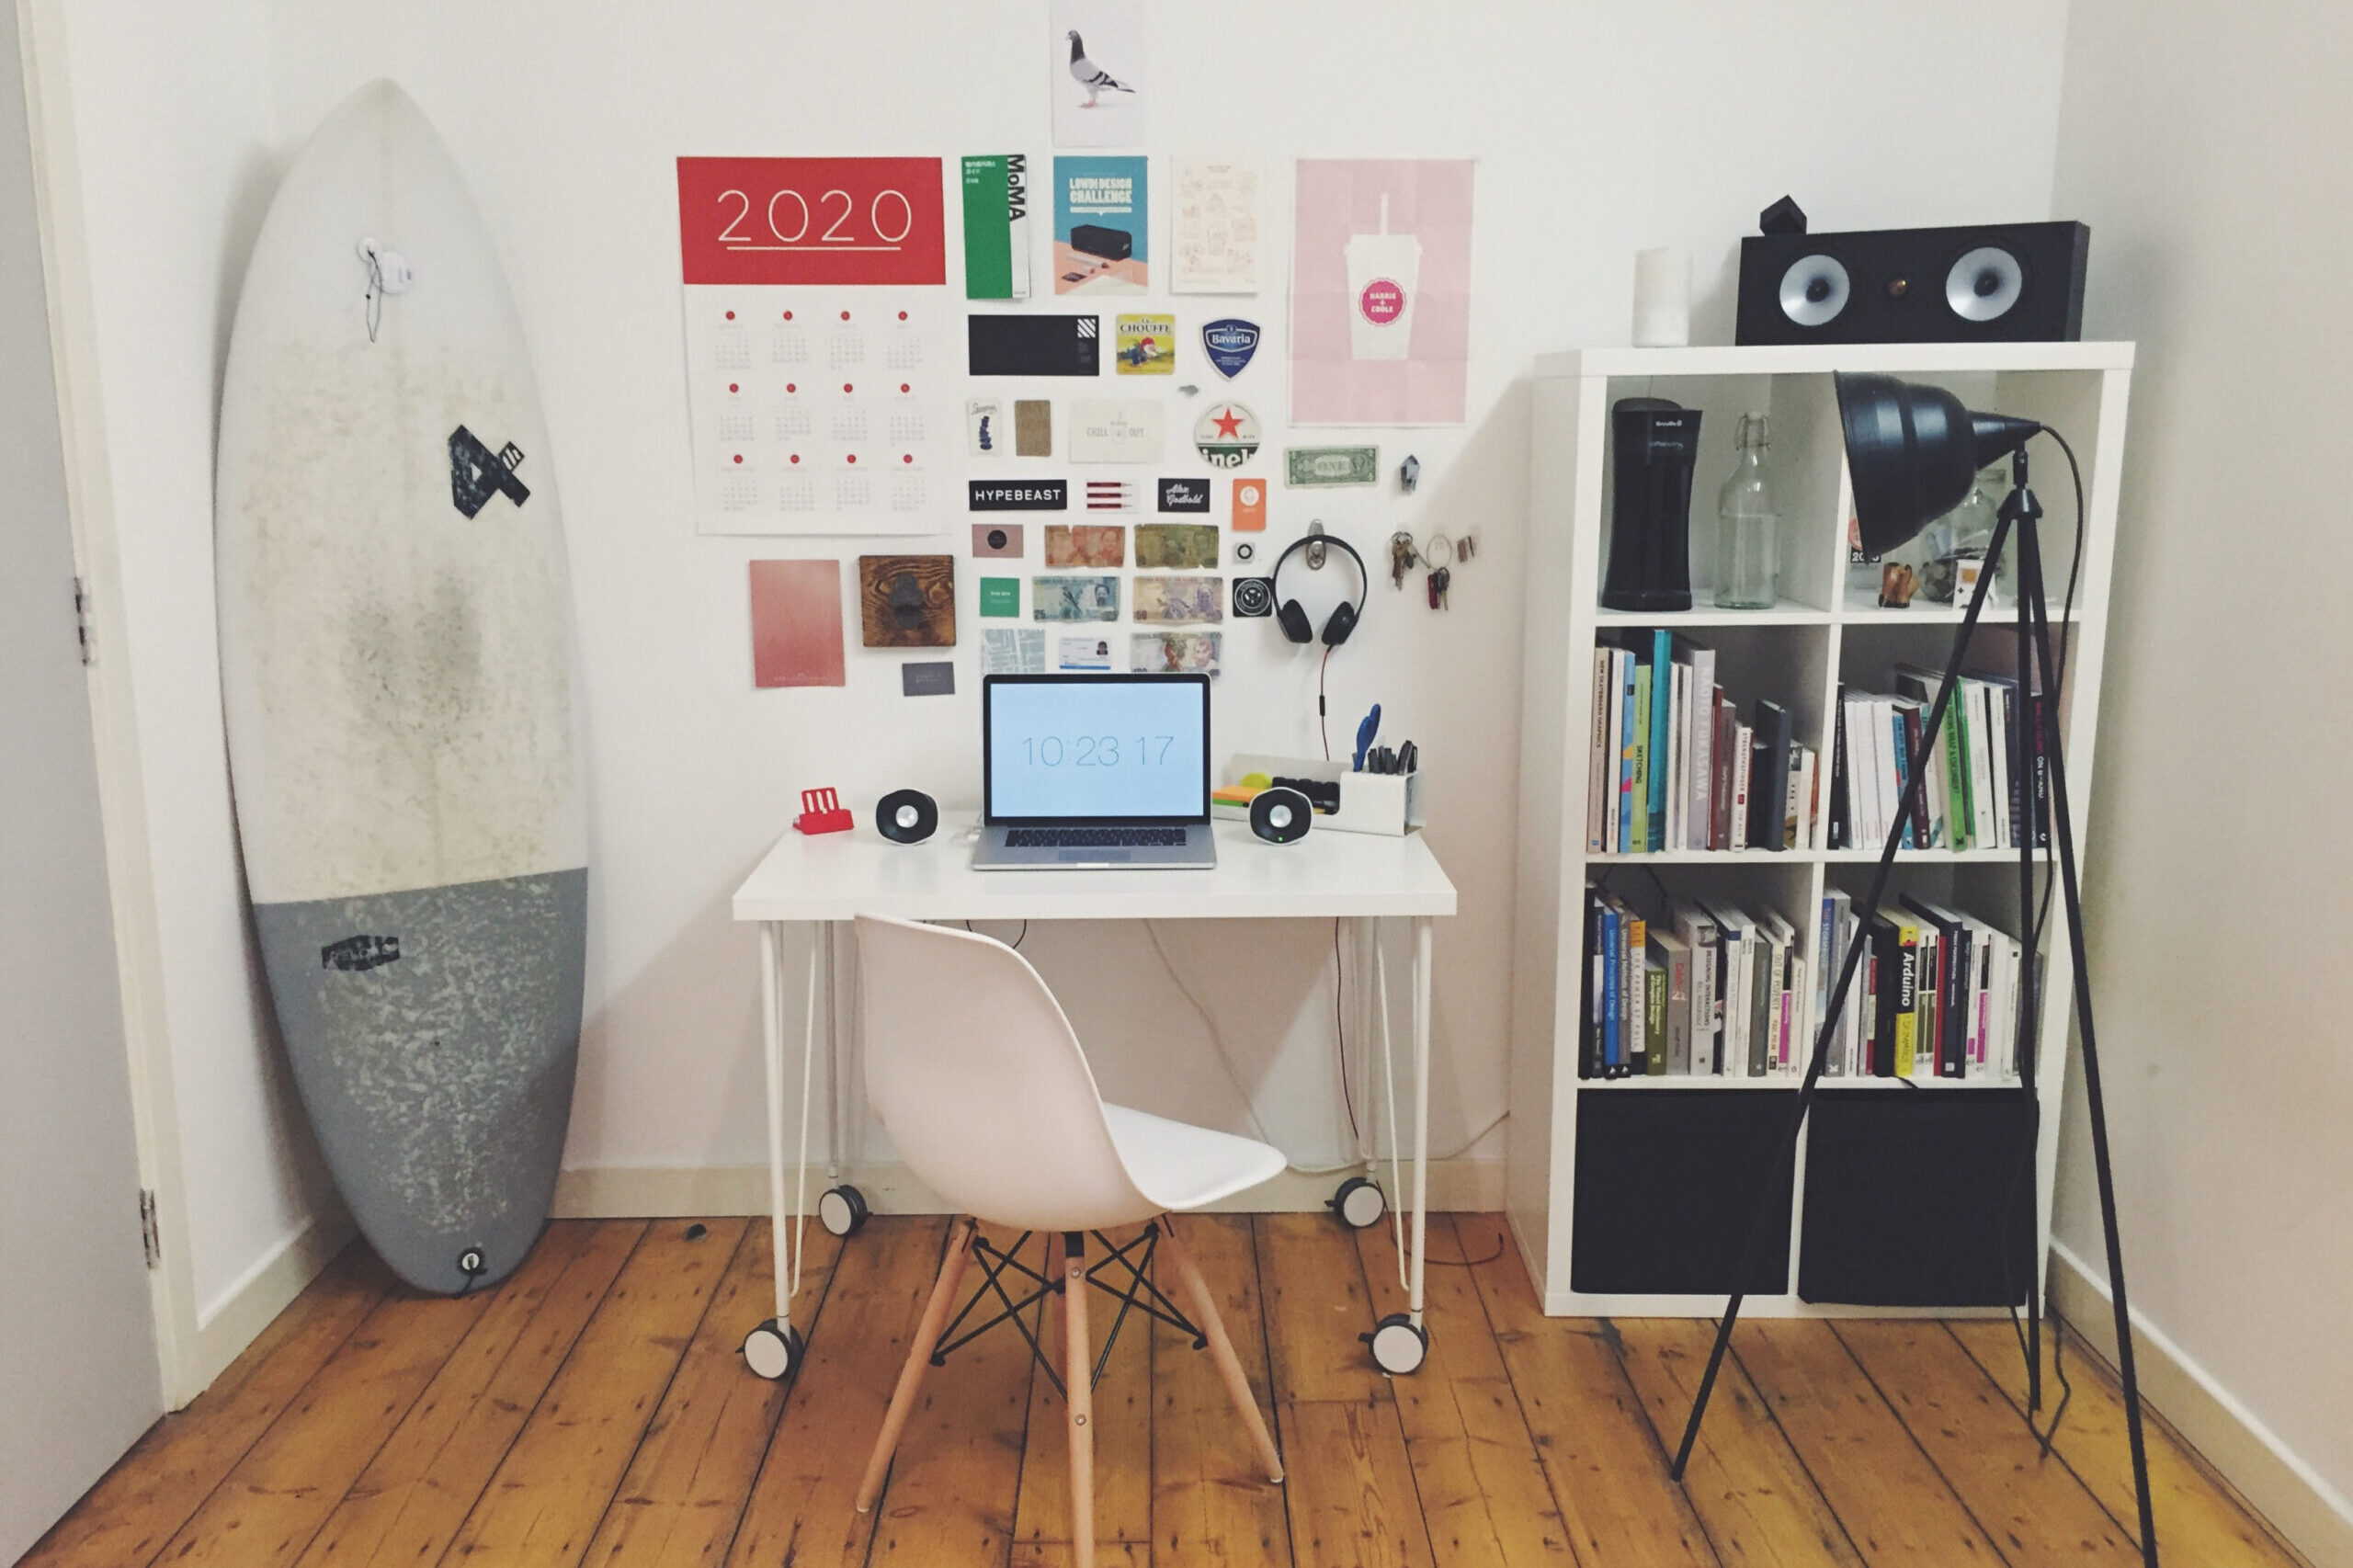 Simple and cosy home-office with surf-board, bookshelf and small desk with laptop